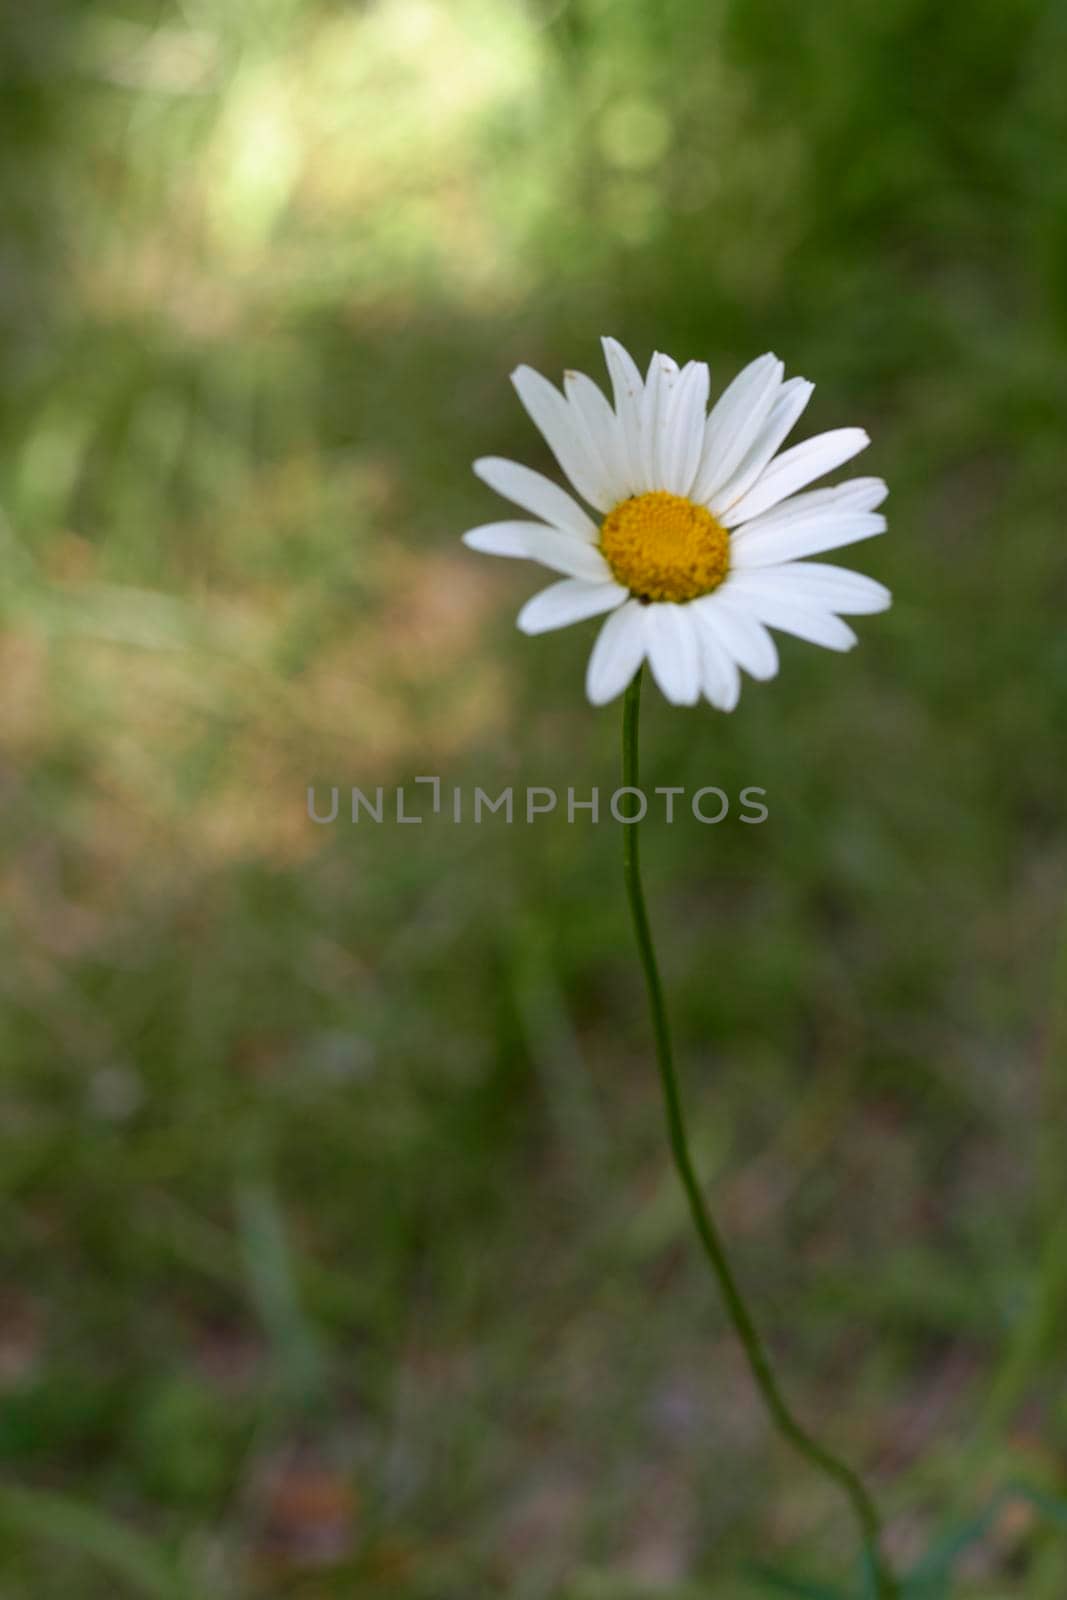 A daisy flower with stem. Unfocused background and green, front view, no contrast, yellow and white.